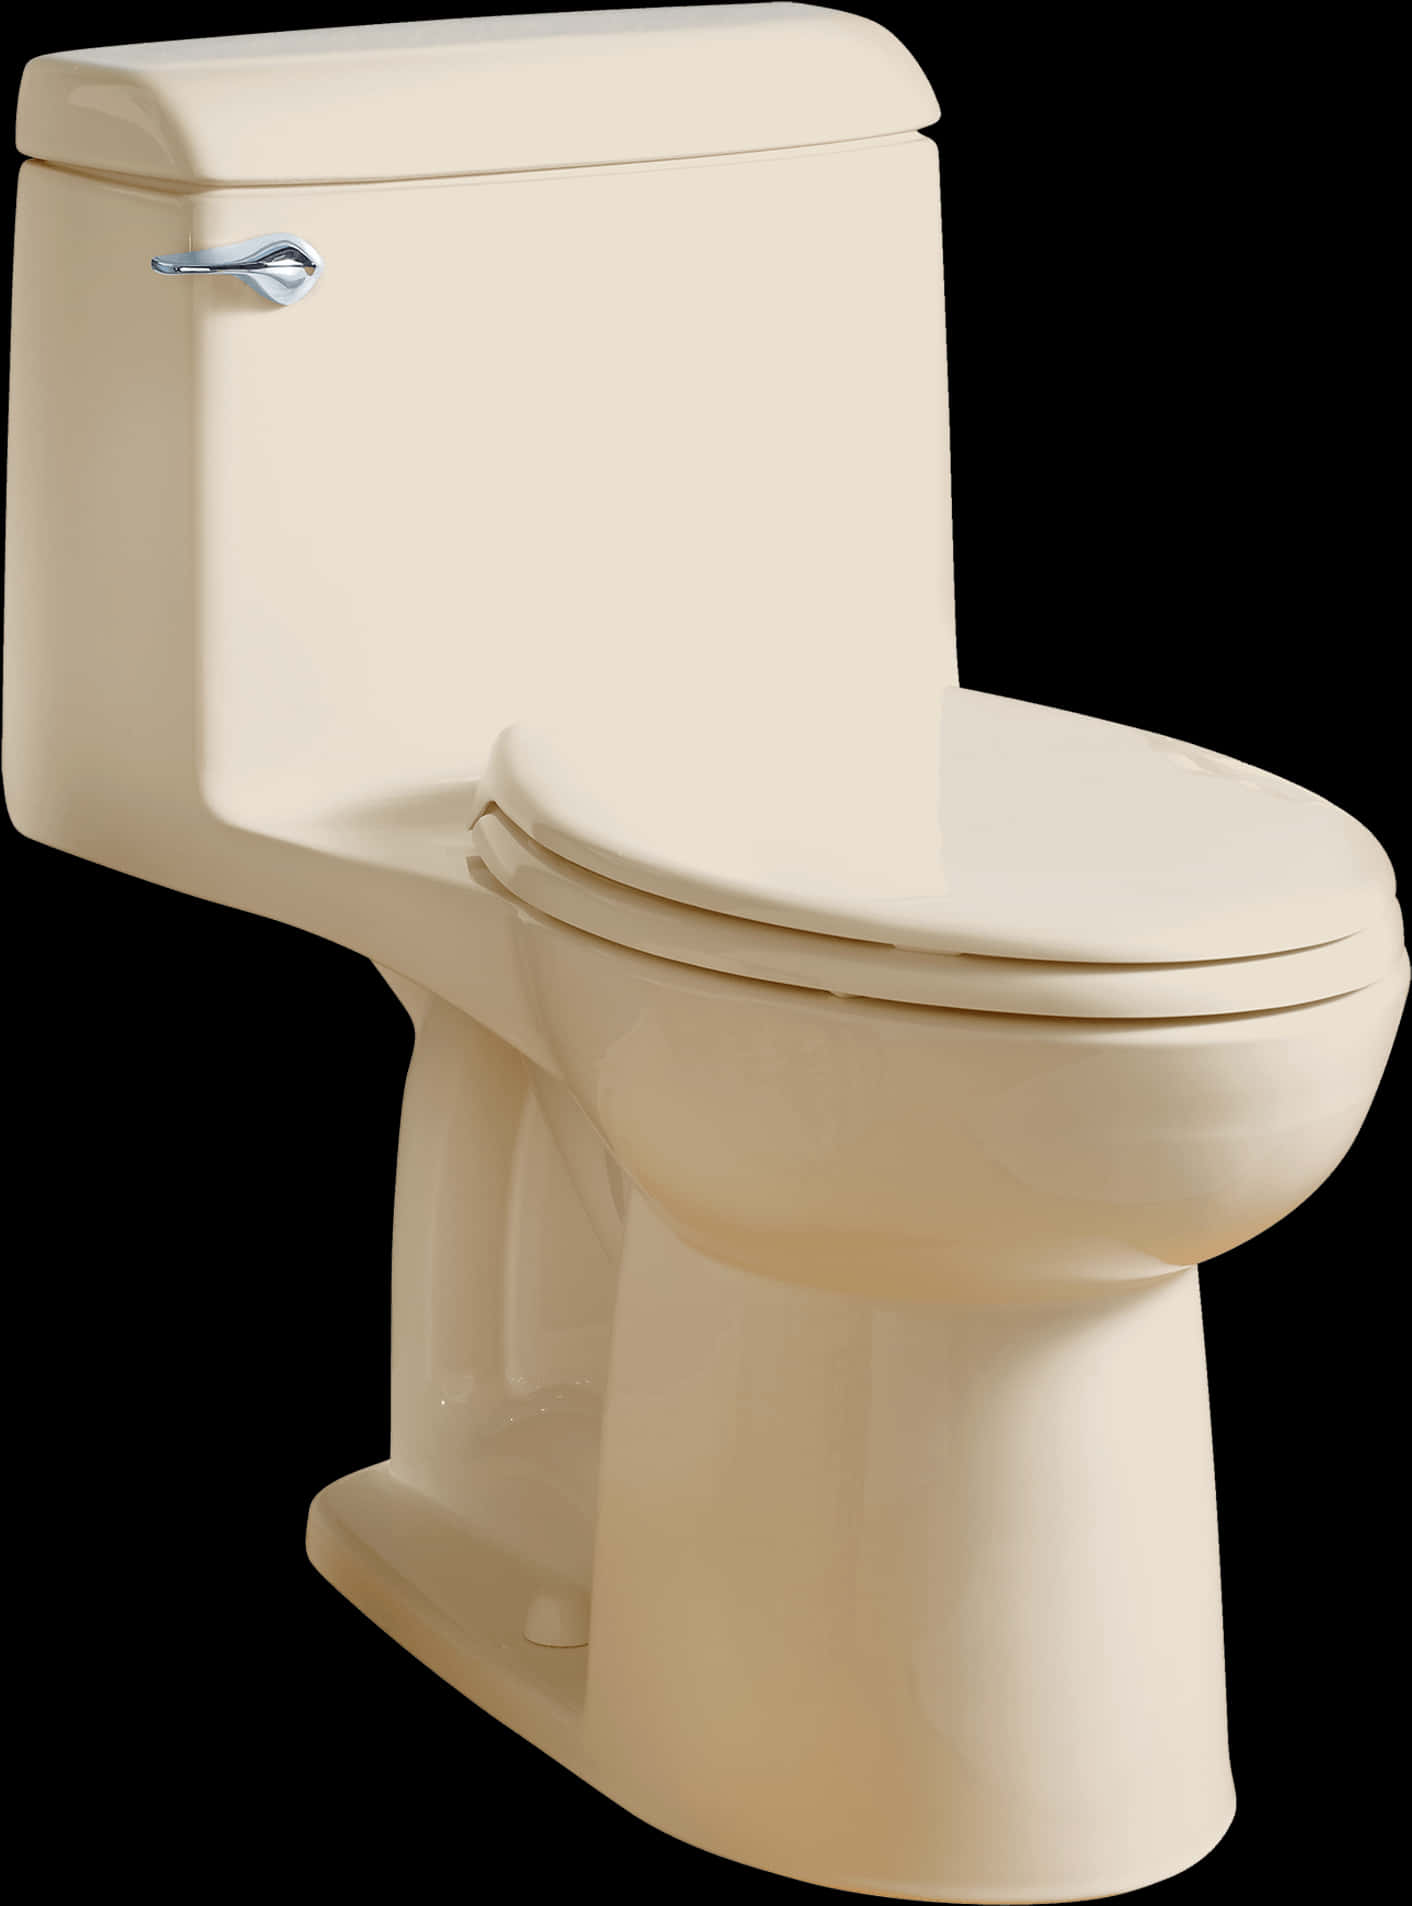 A White Toilet With A Silver Handle